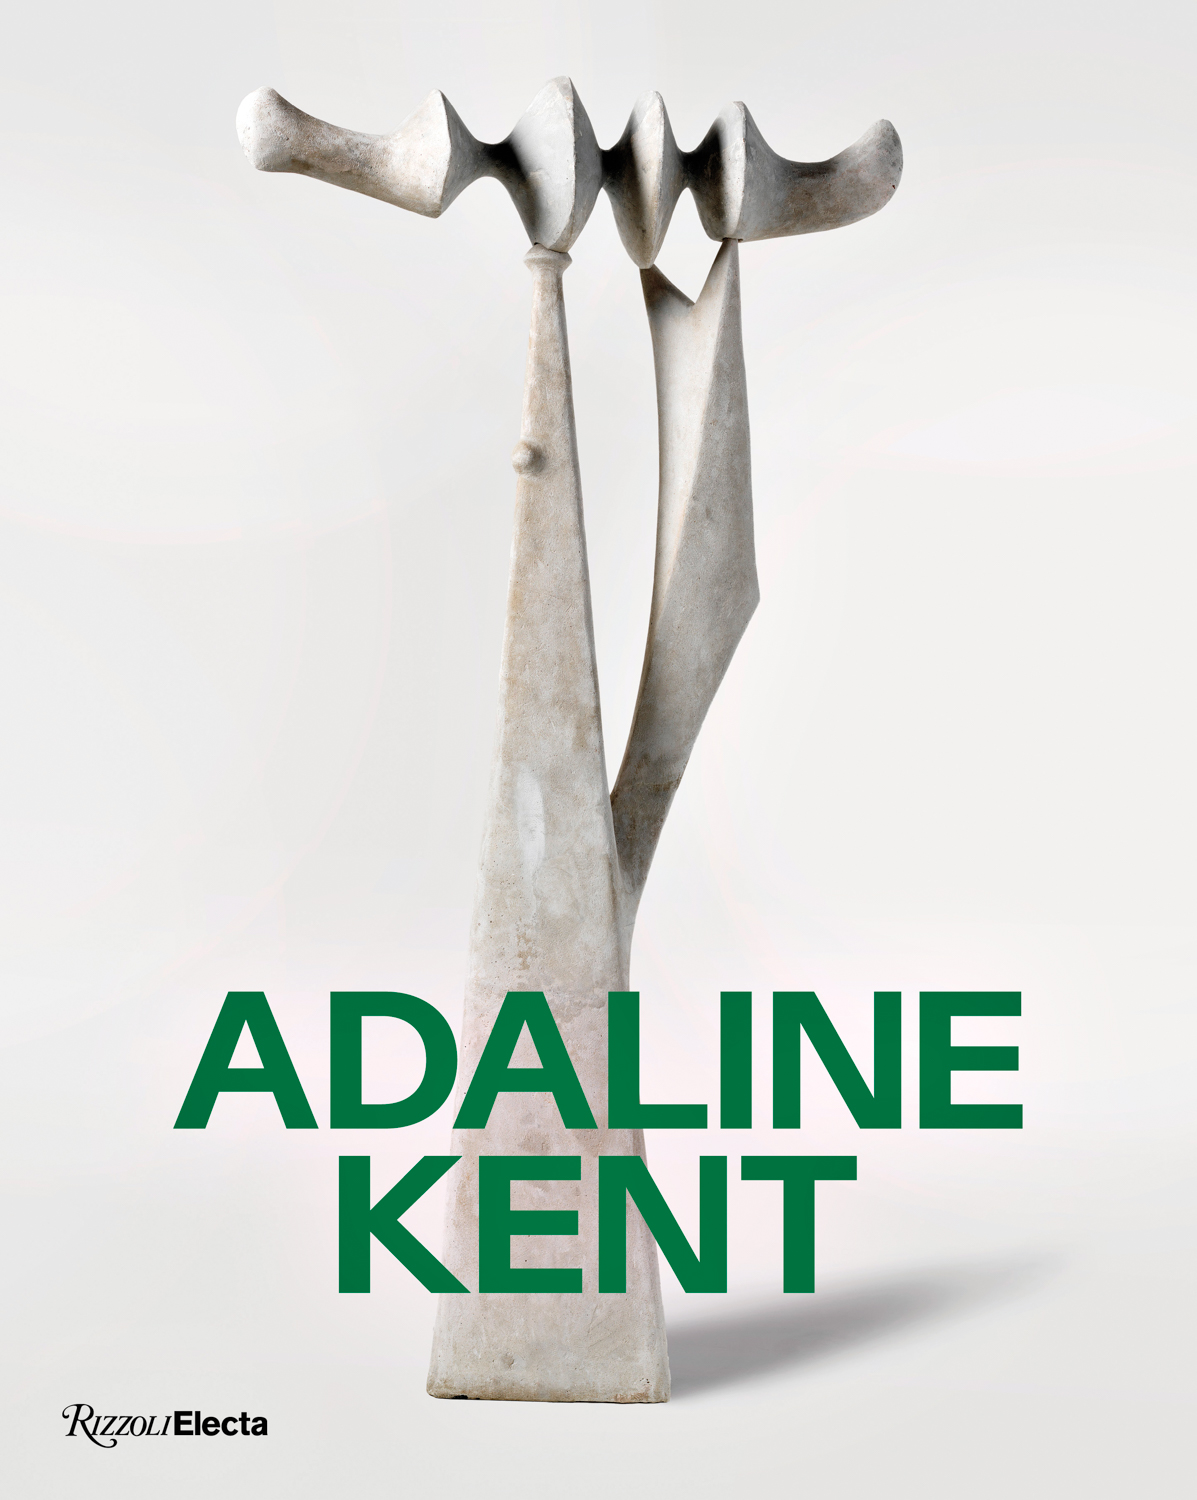 The cover of artist Adaline Kent's book.